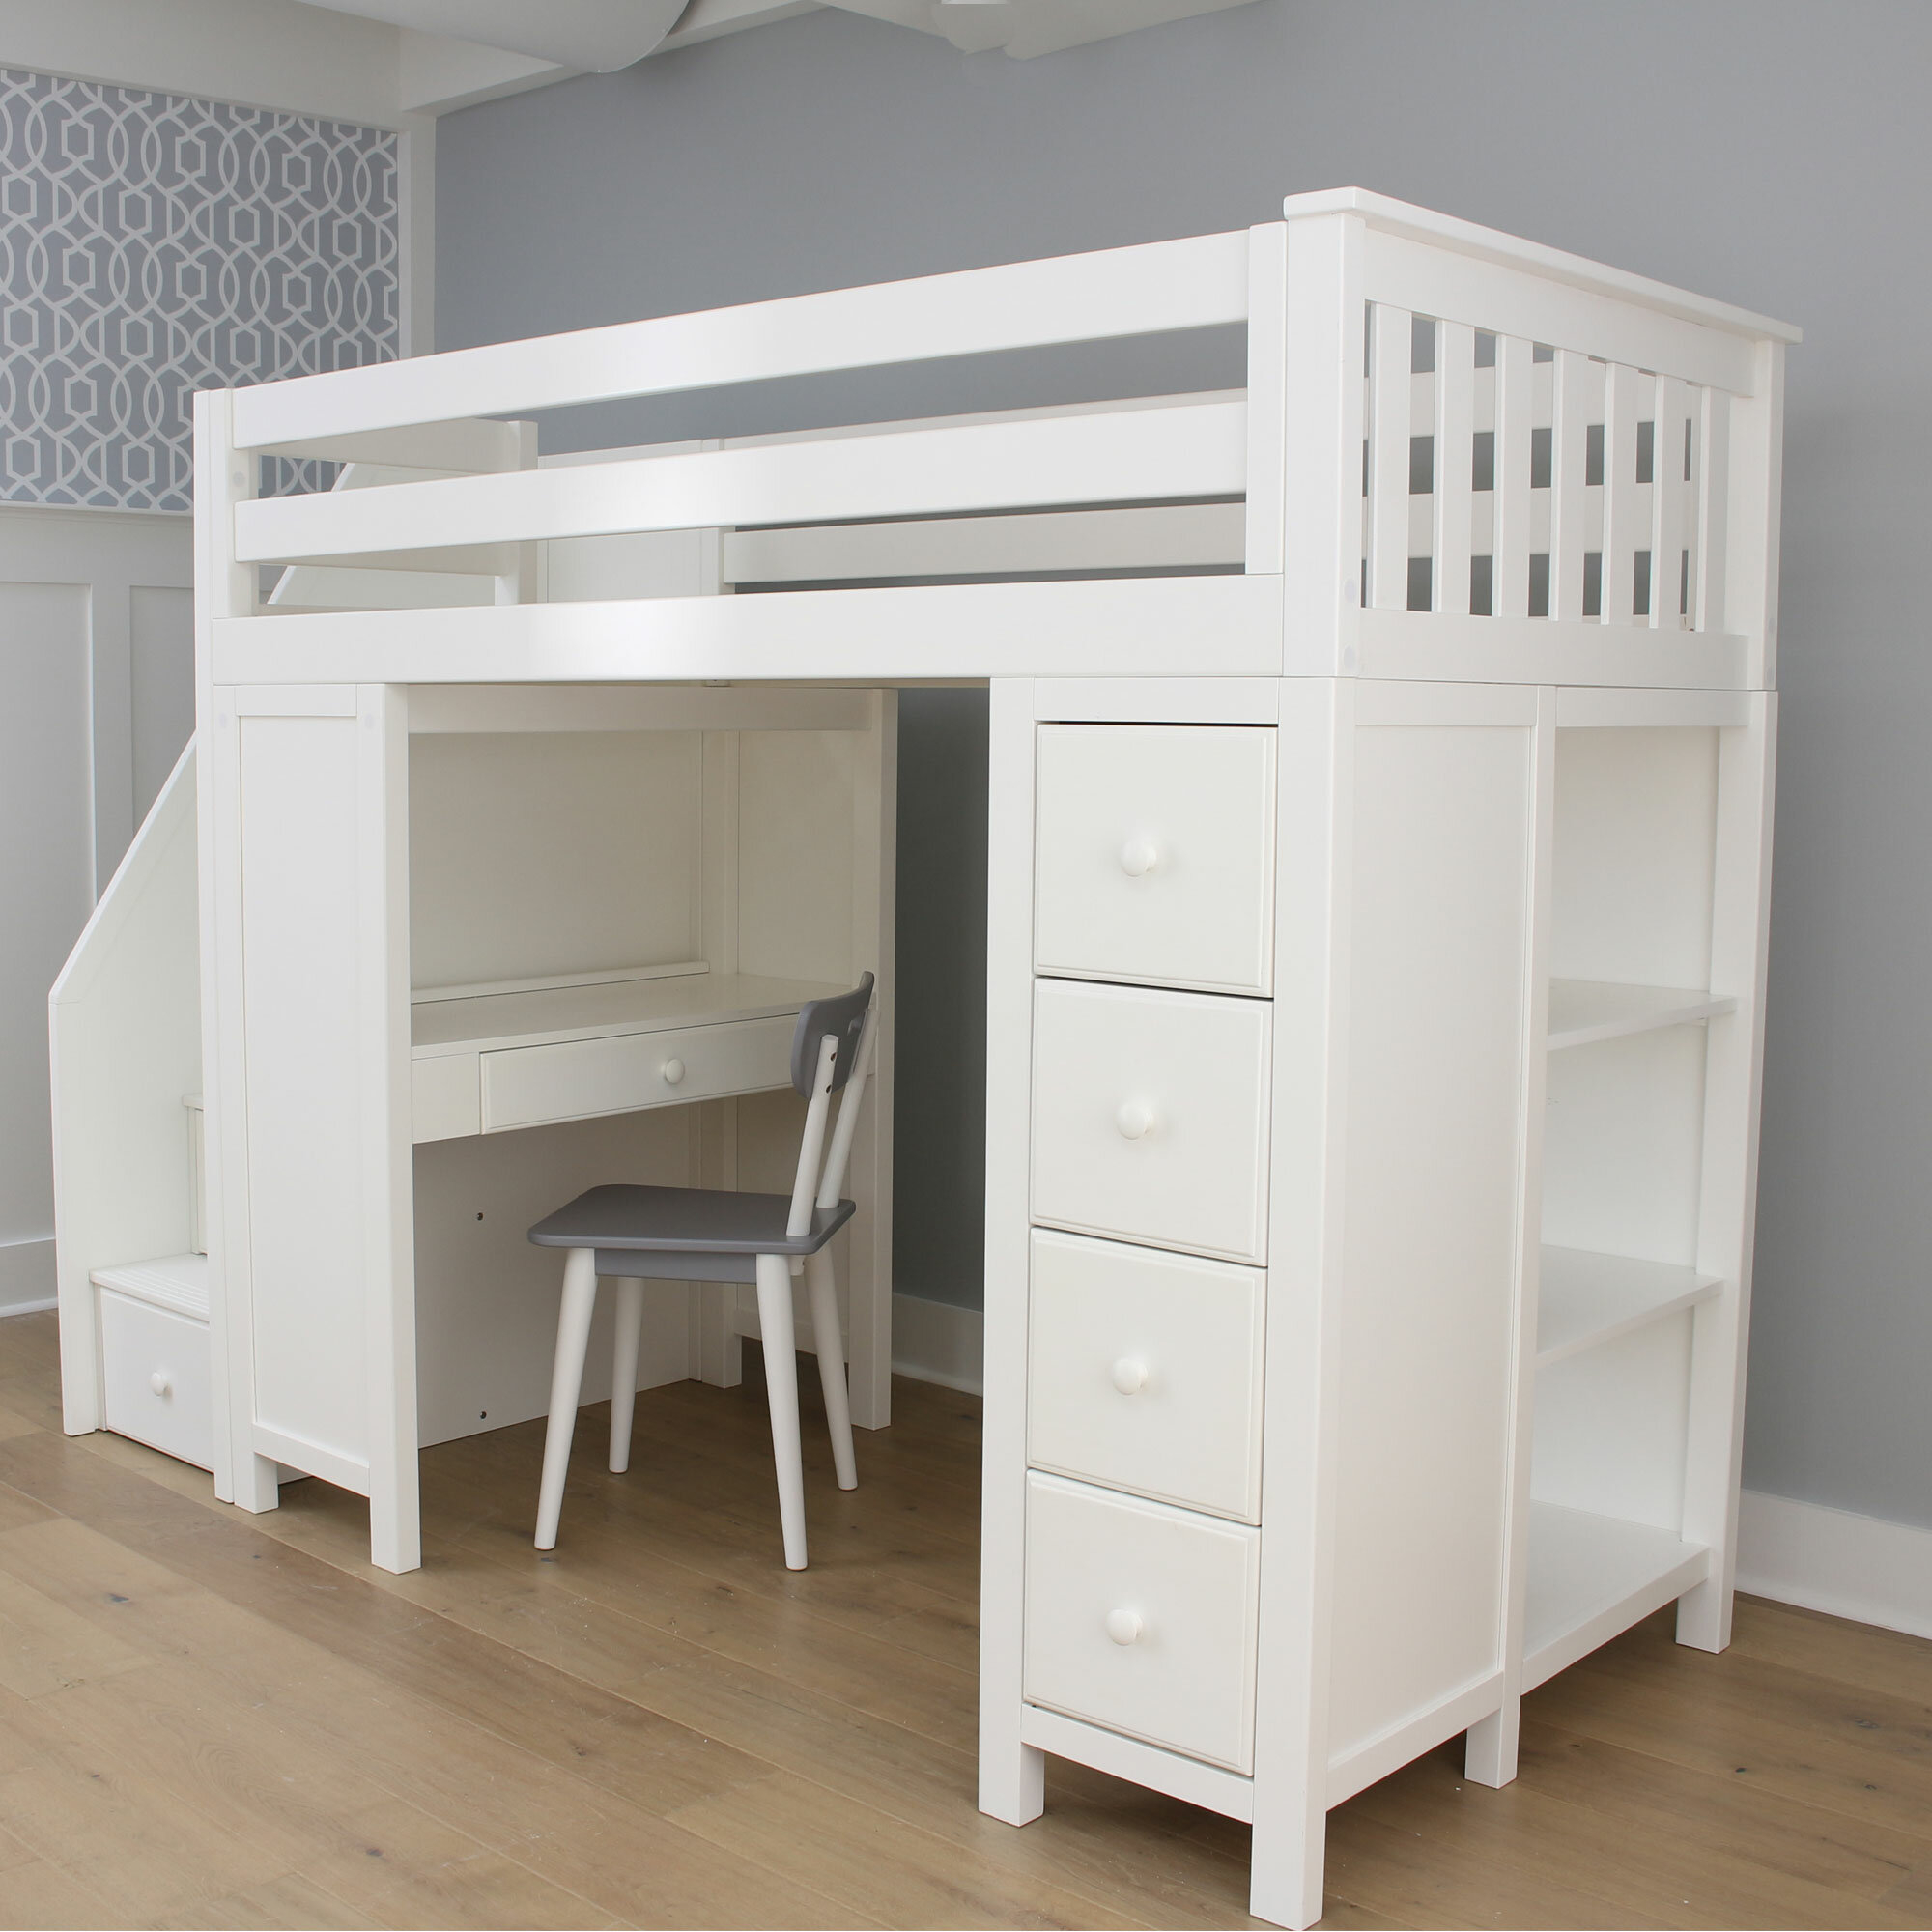 Bunk Beds With Dressers Visualhunt, Bunk Bed With Closet And Drawers